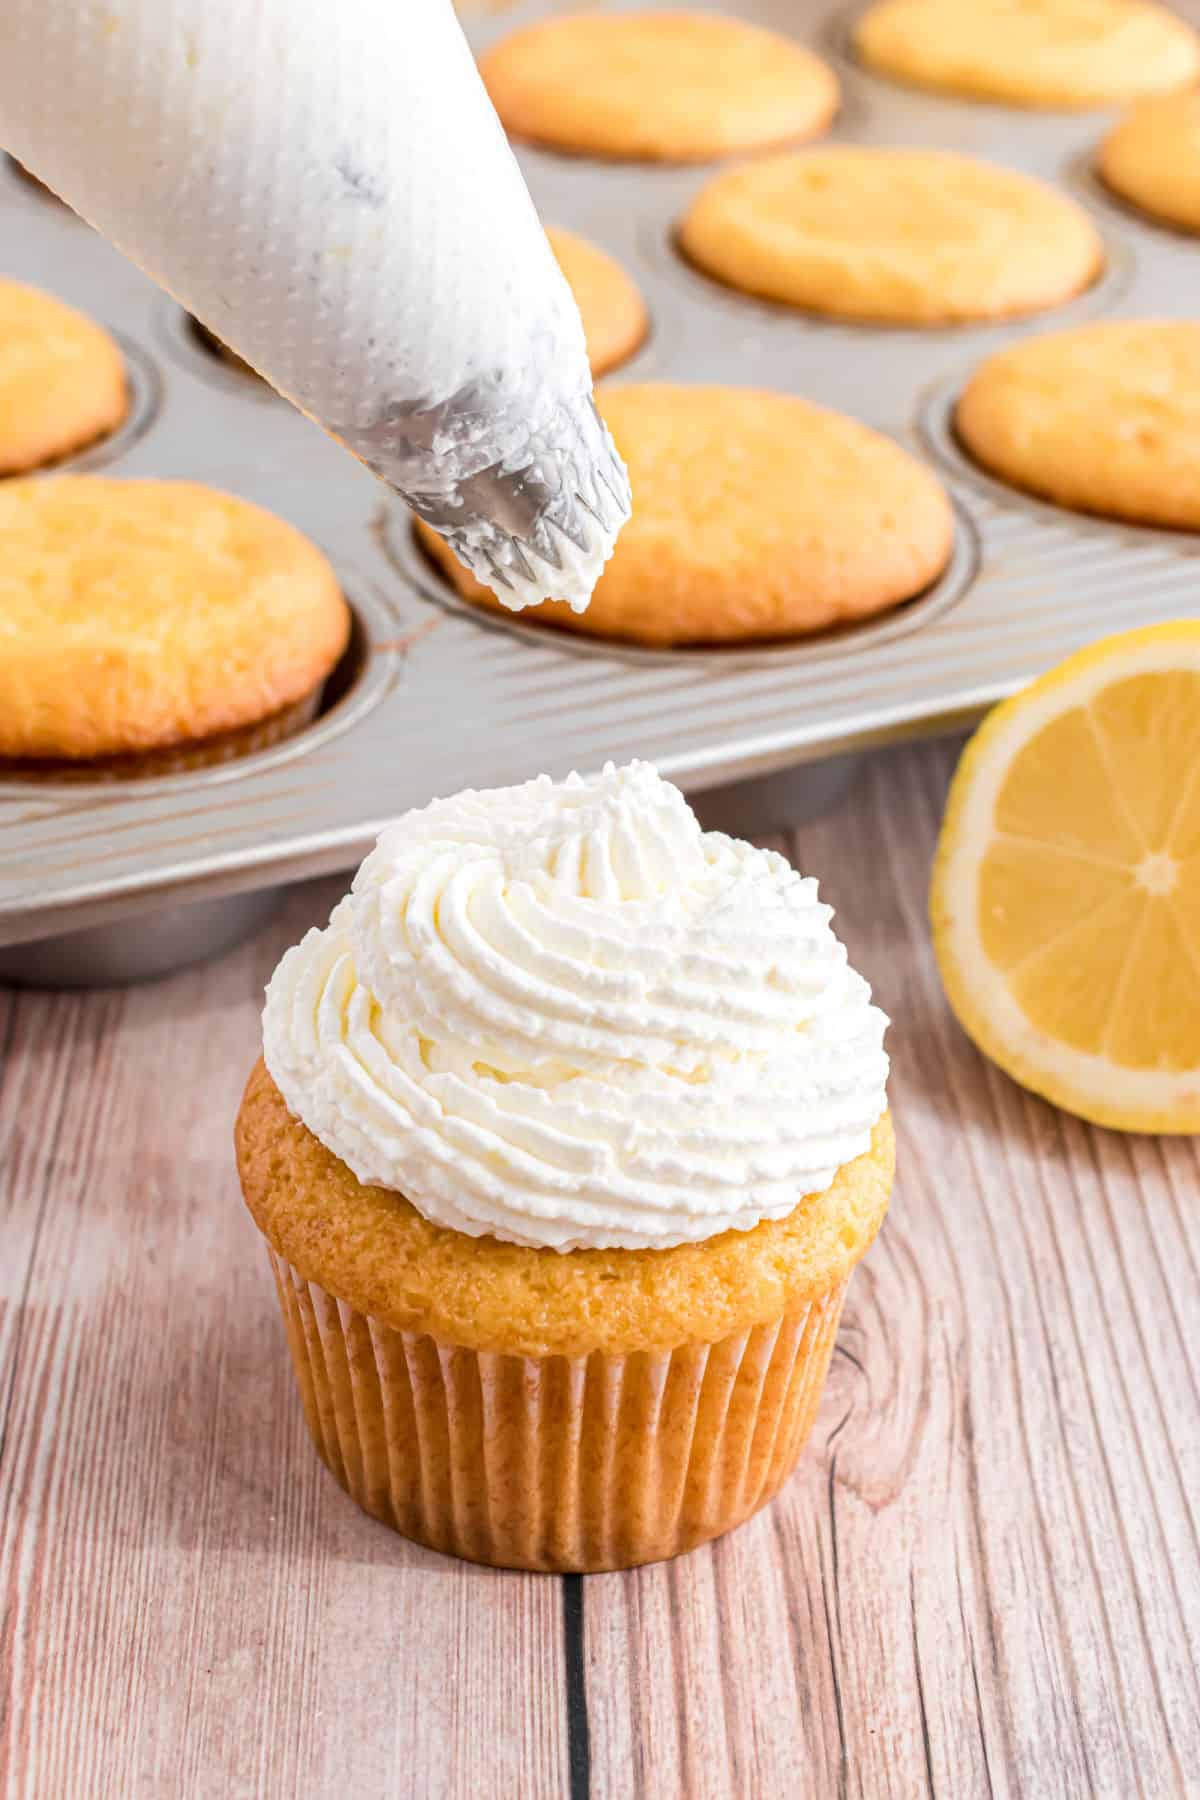 Lemon whipped cream being piped onto a cupcake.